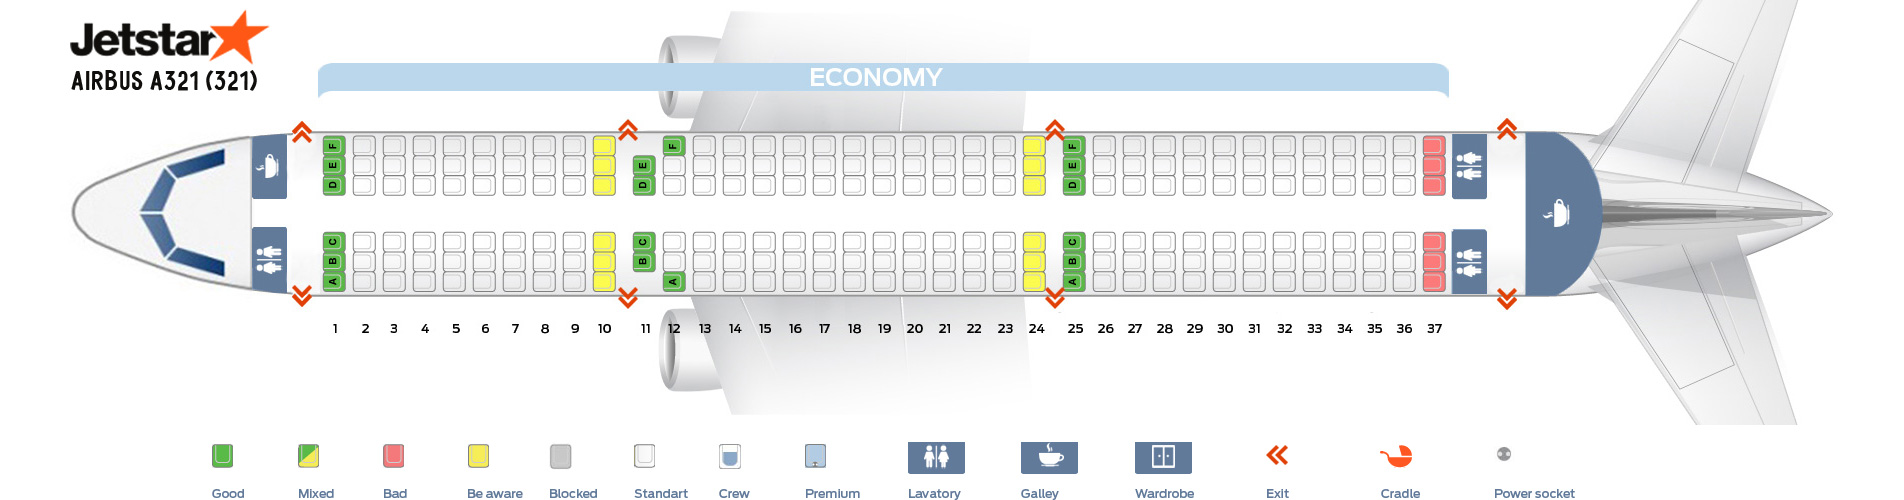 Seat map Airbus A321200 Jetstar. Best seats in the plane